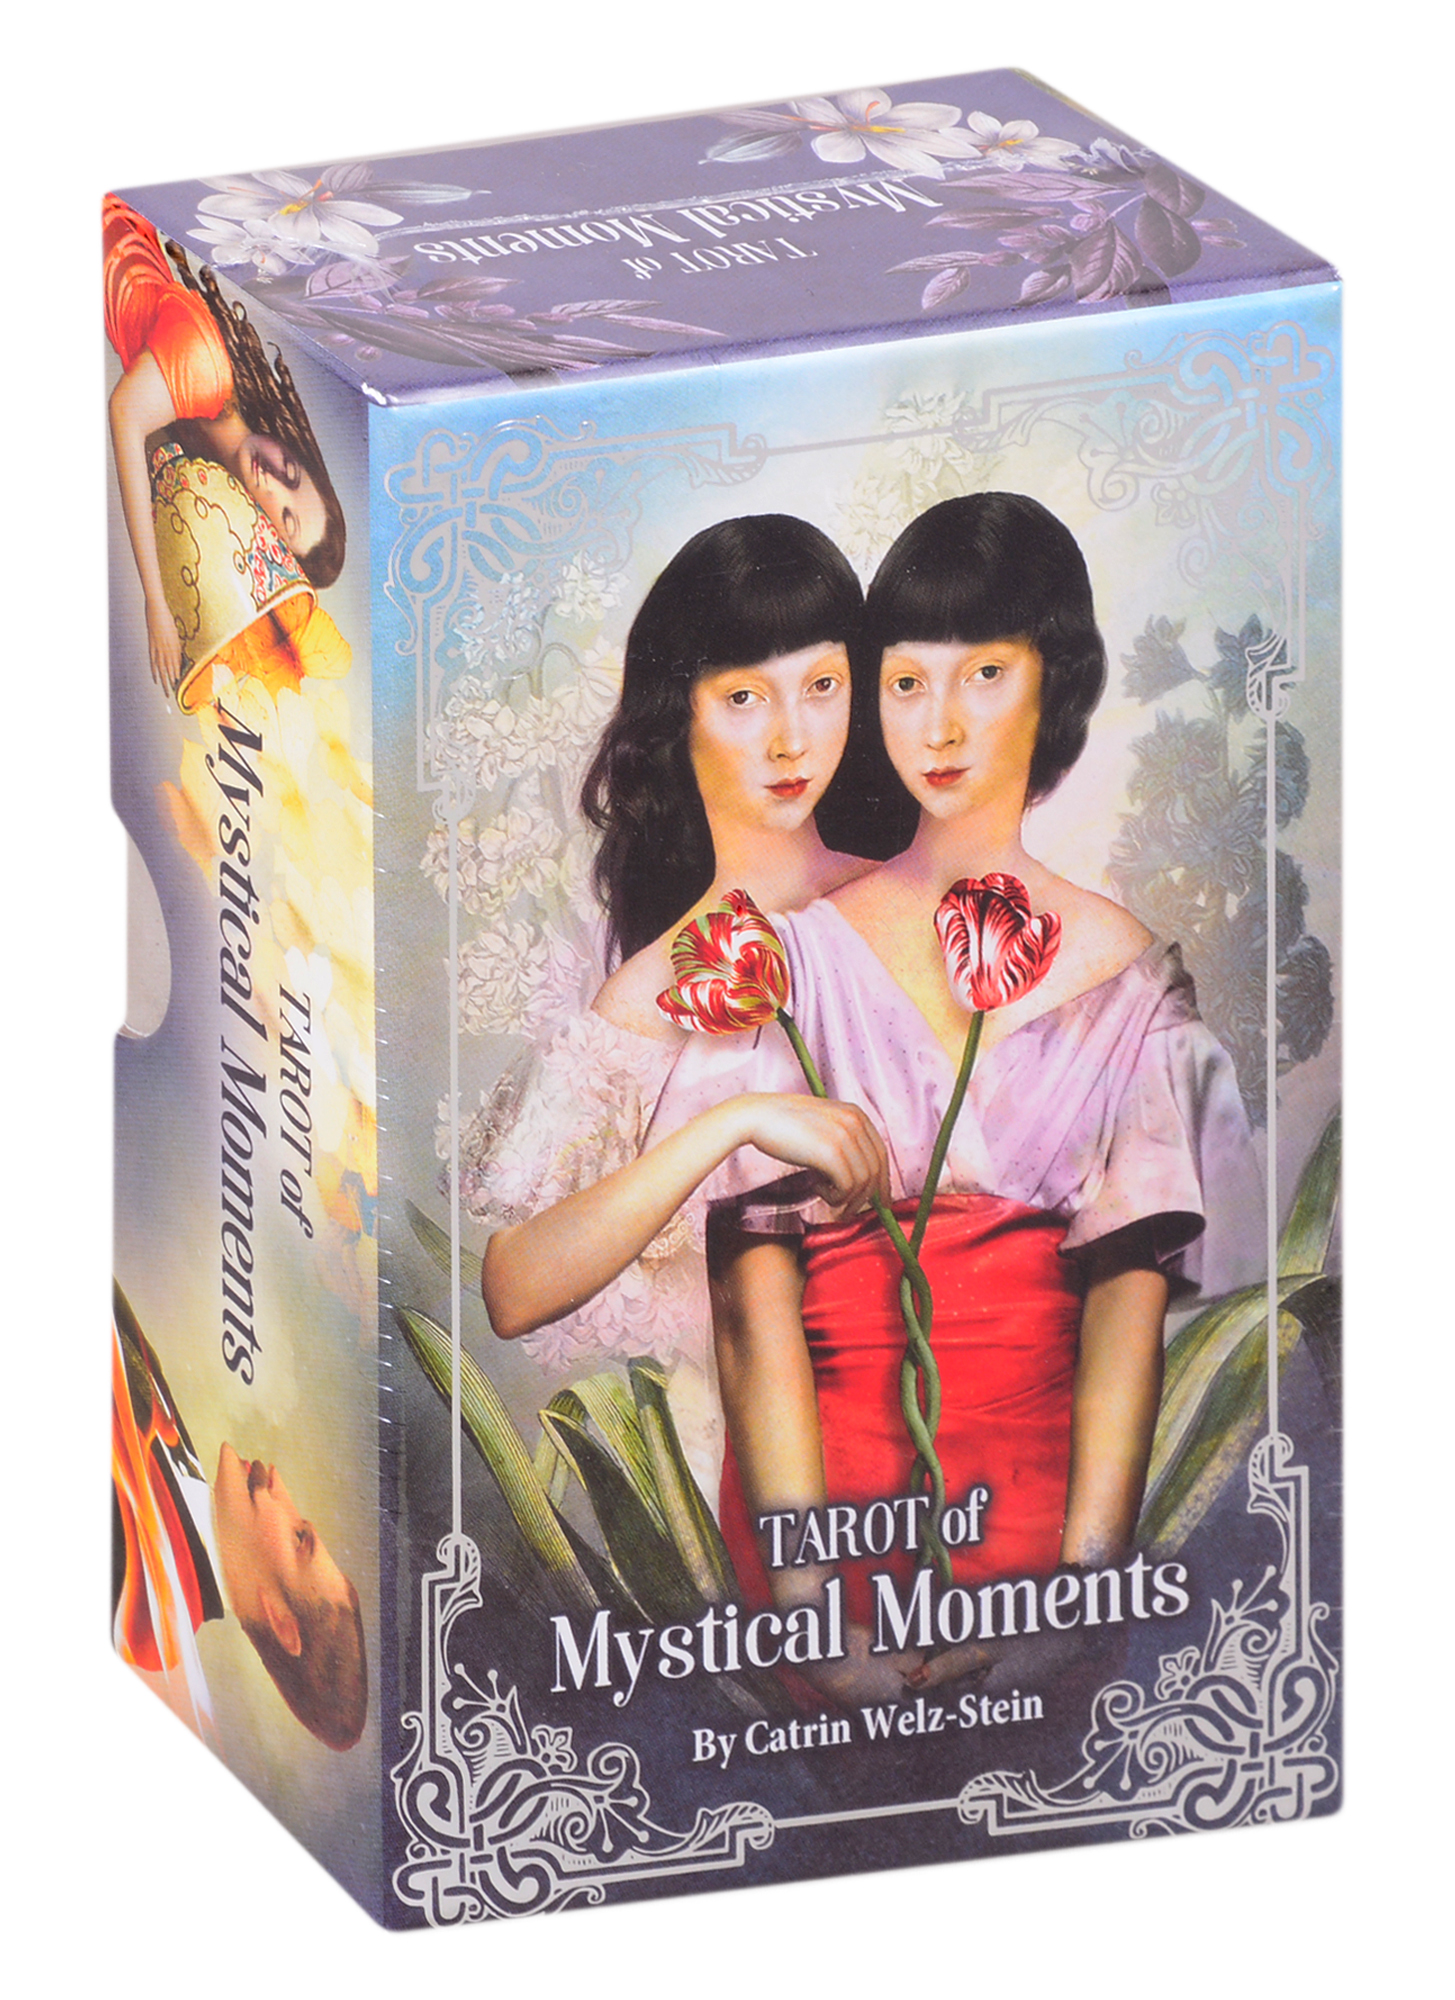 Tarot of Mystical Moments (96 карт) 20 style cards tarot english version oracle card tarot board games divination fate deck game with pdf guidebook